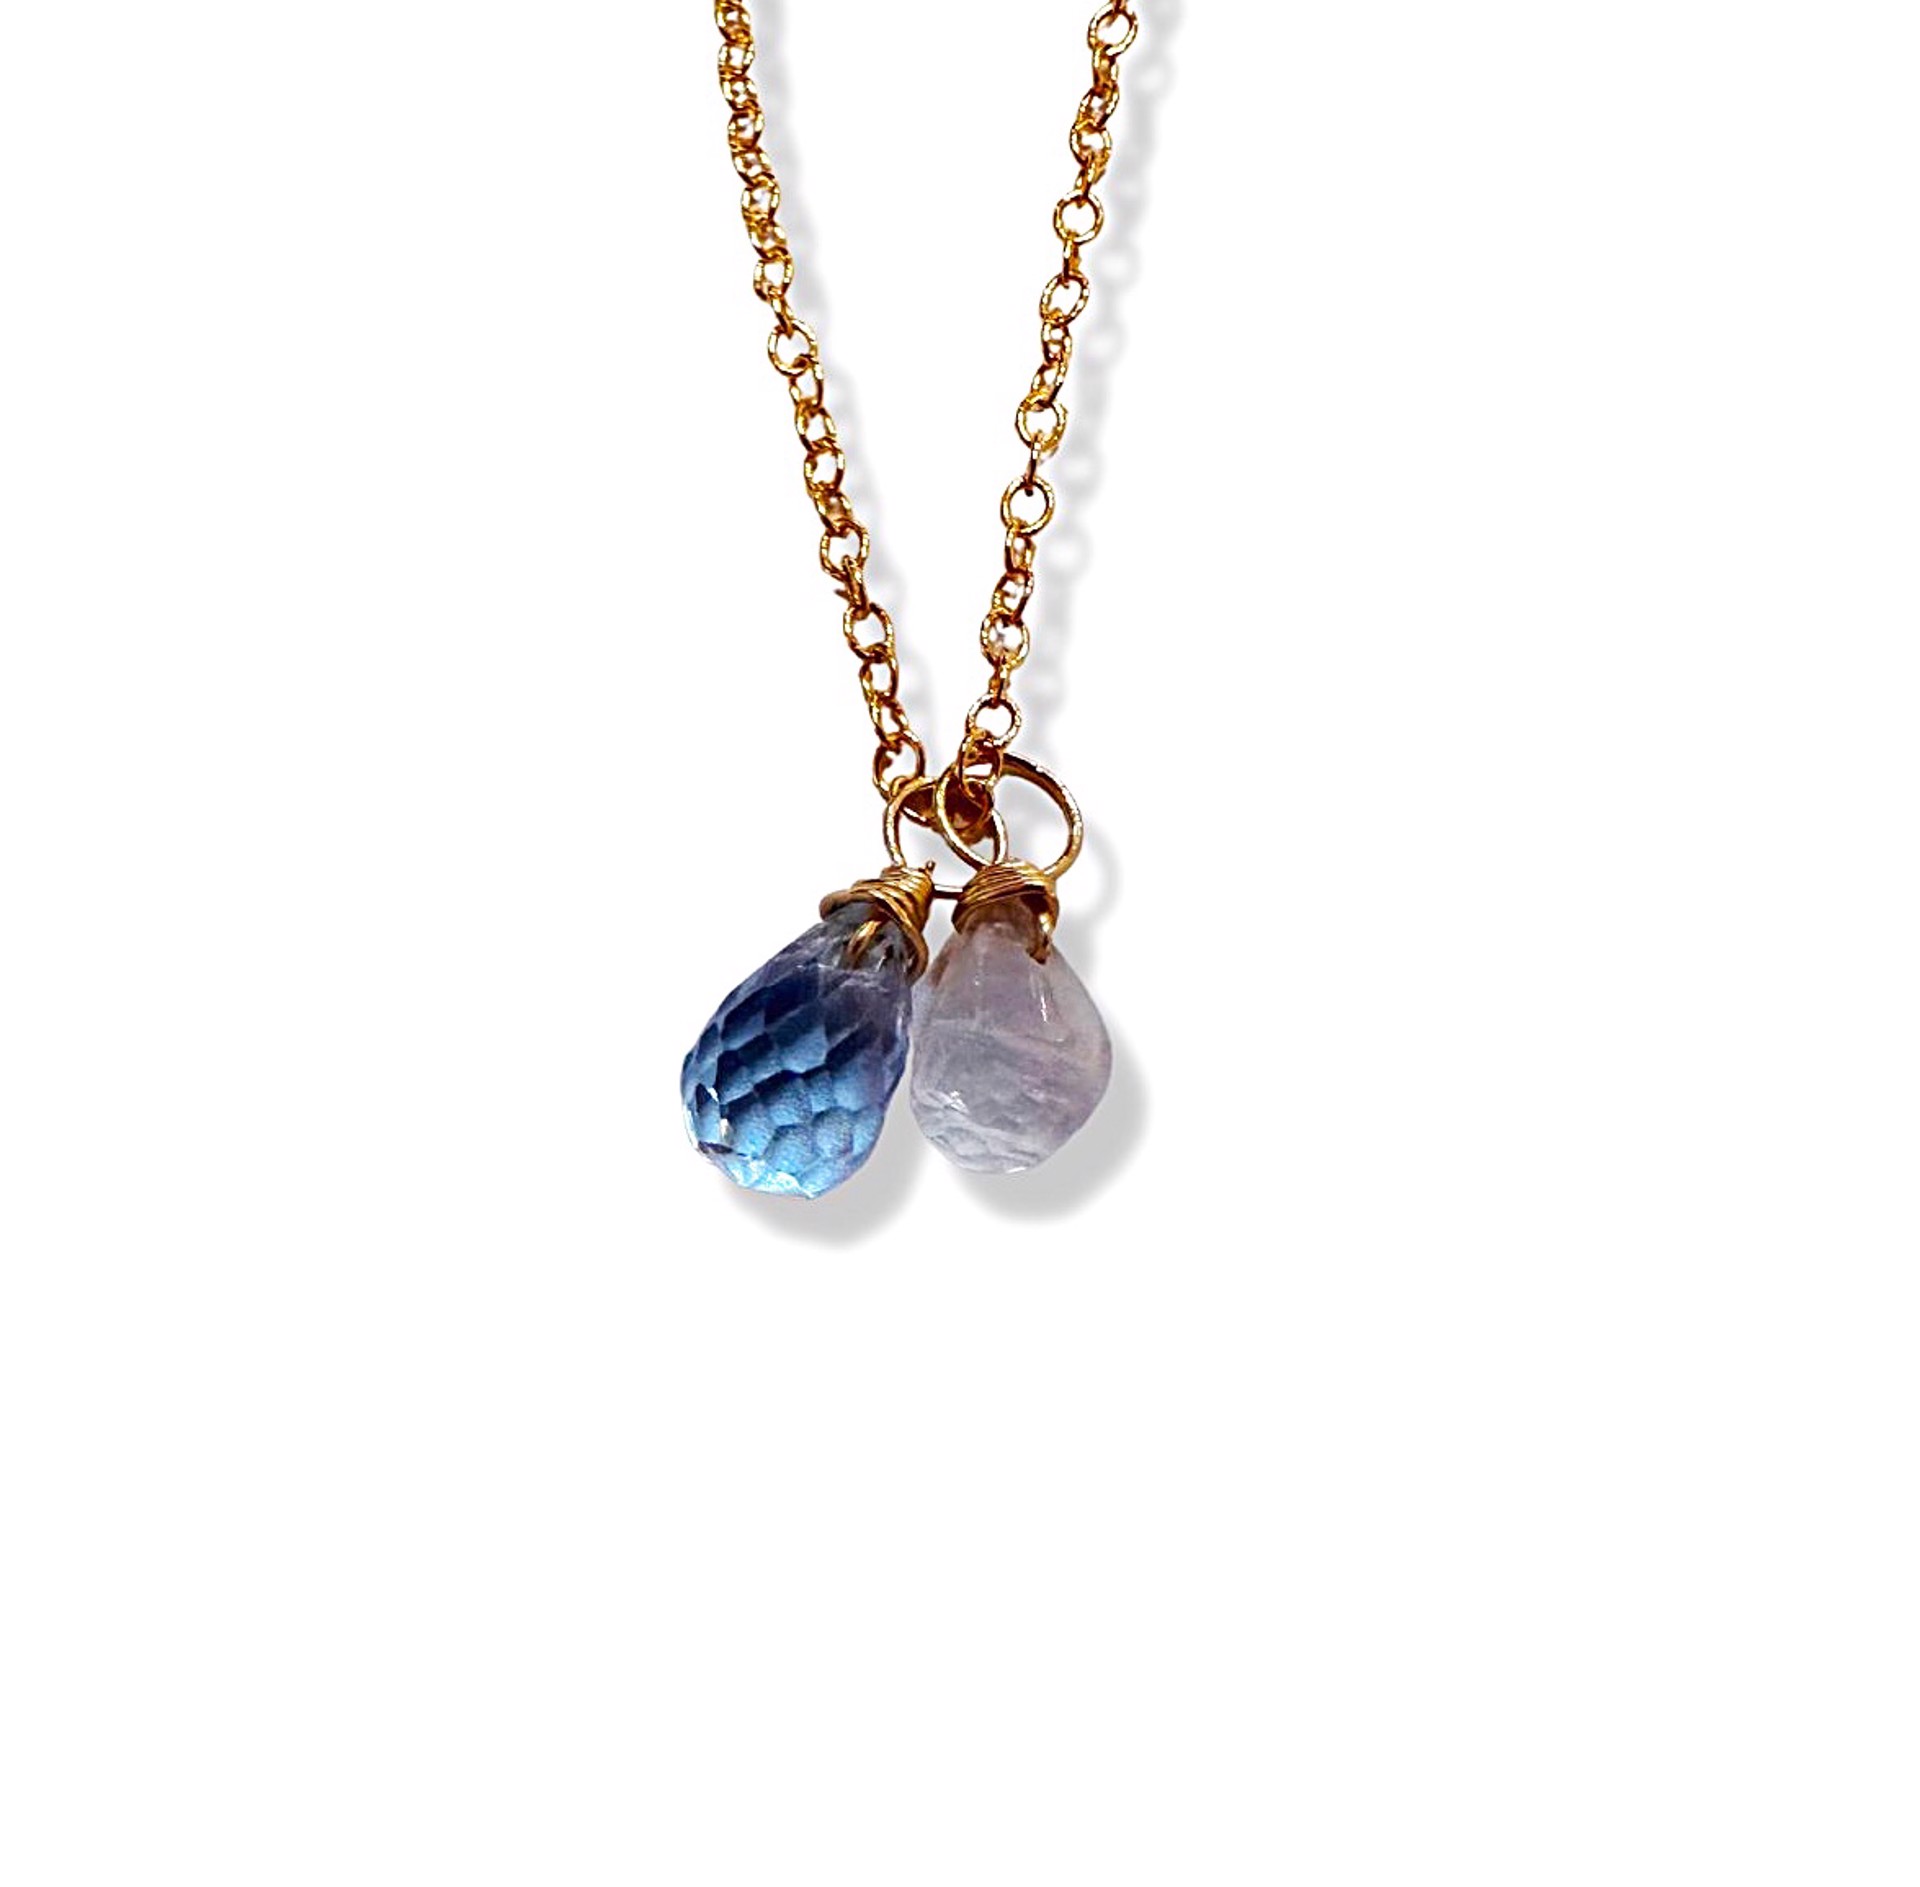 Necklace - Aquamarine and Moonstone Drop with 14K Gold Filling by Julia Balestracci